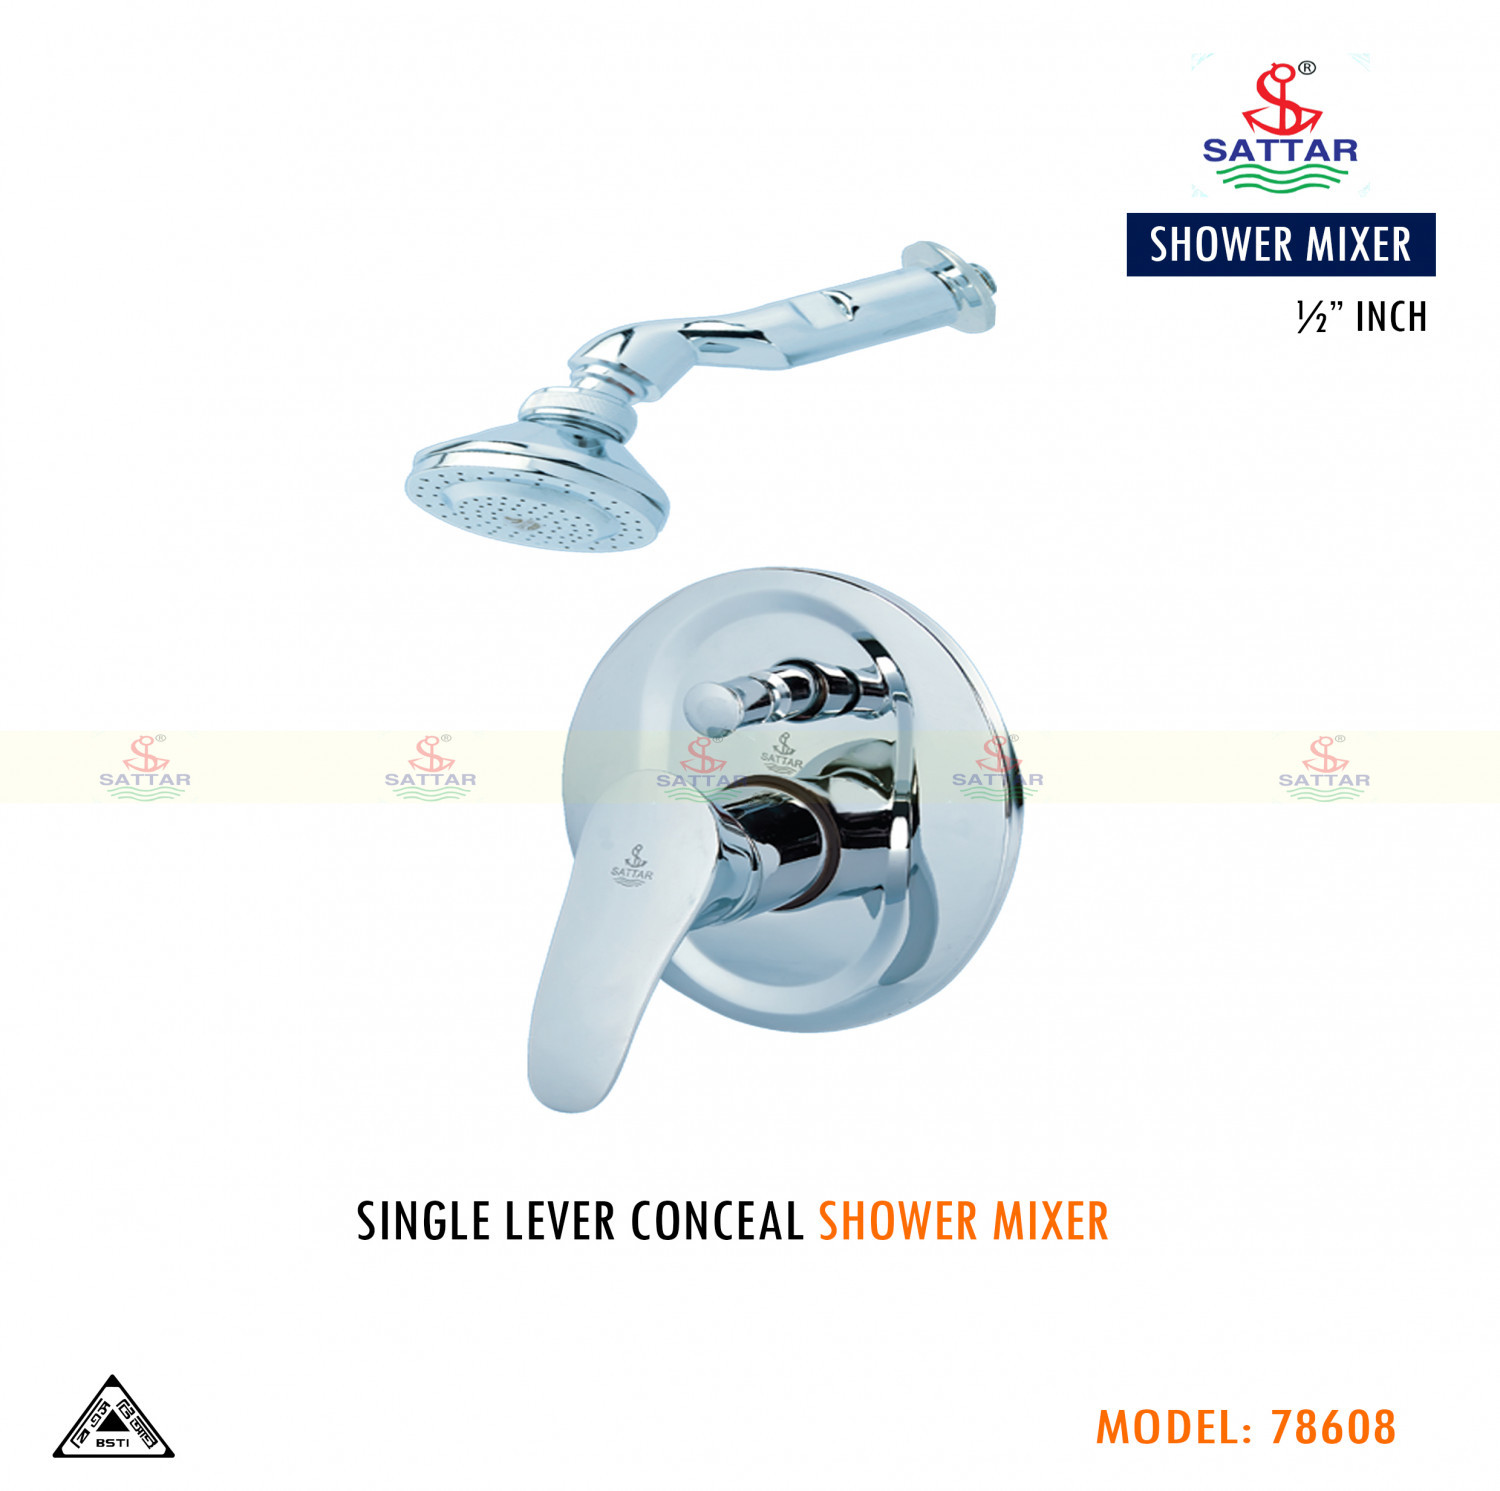 ½” SHOWER MIXER AND CONCEAL SATTAR SMI-78608